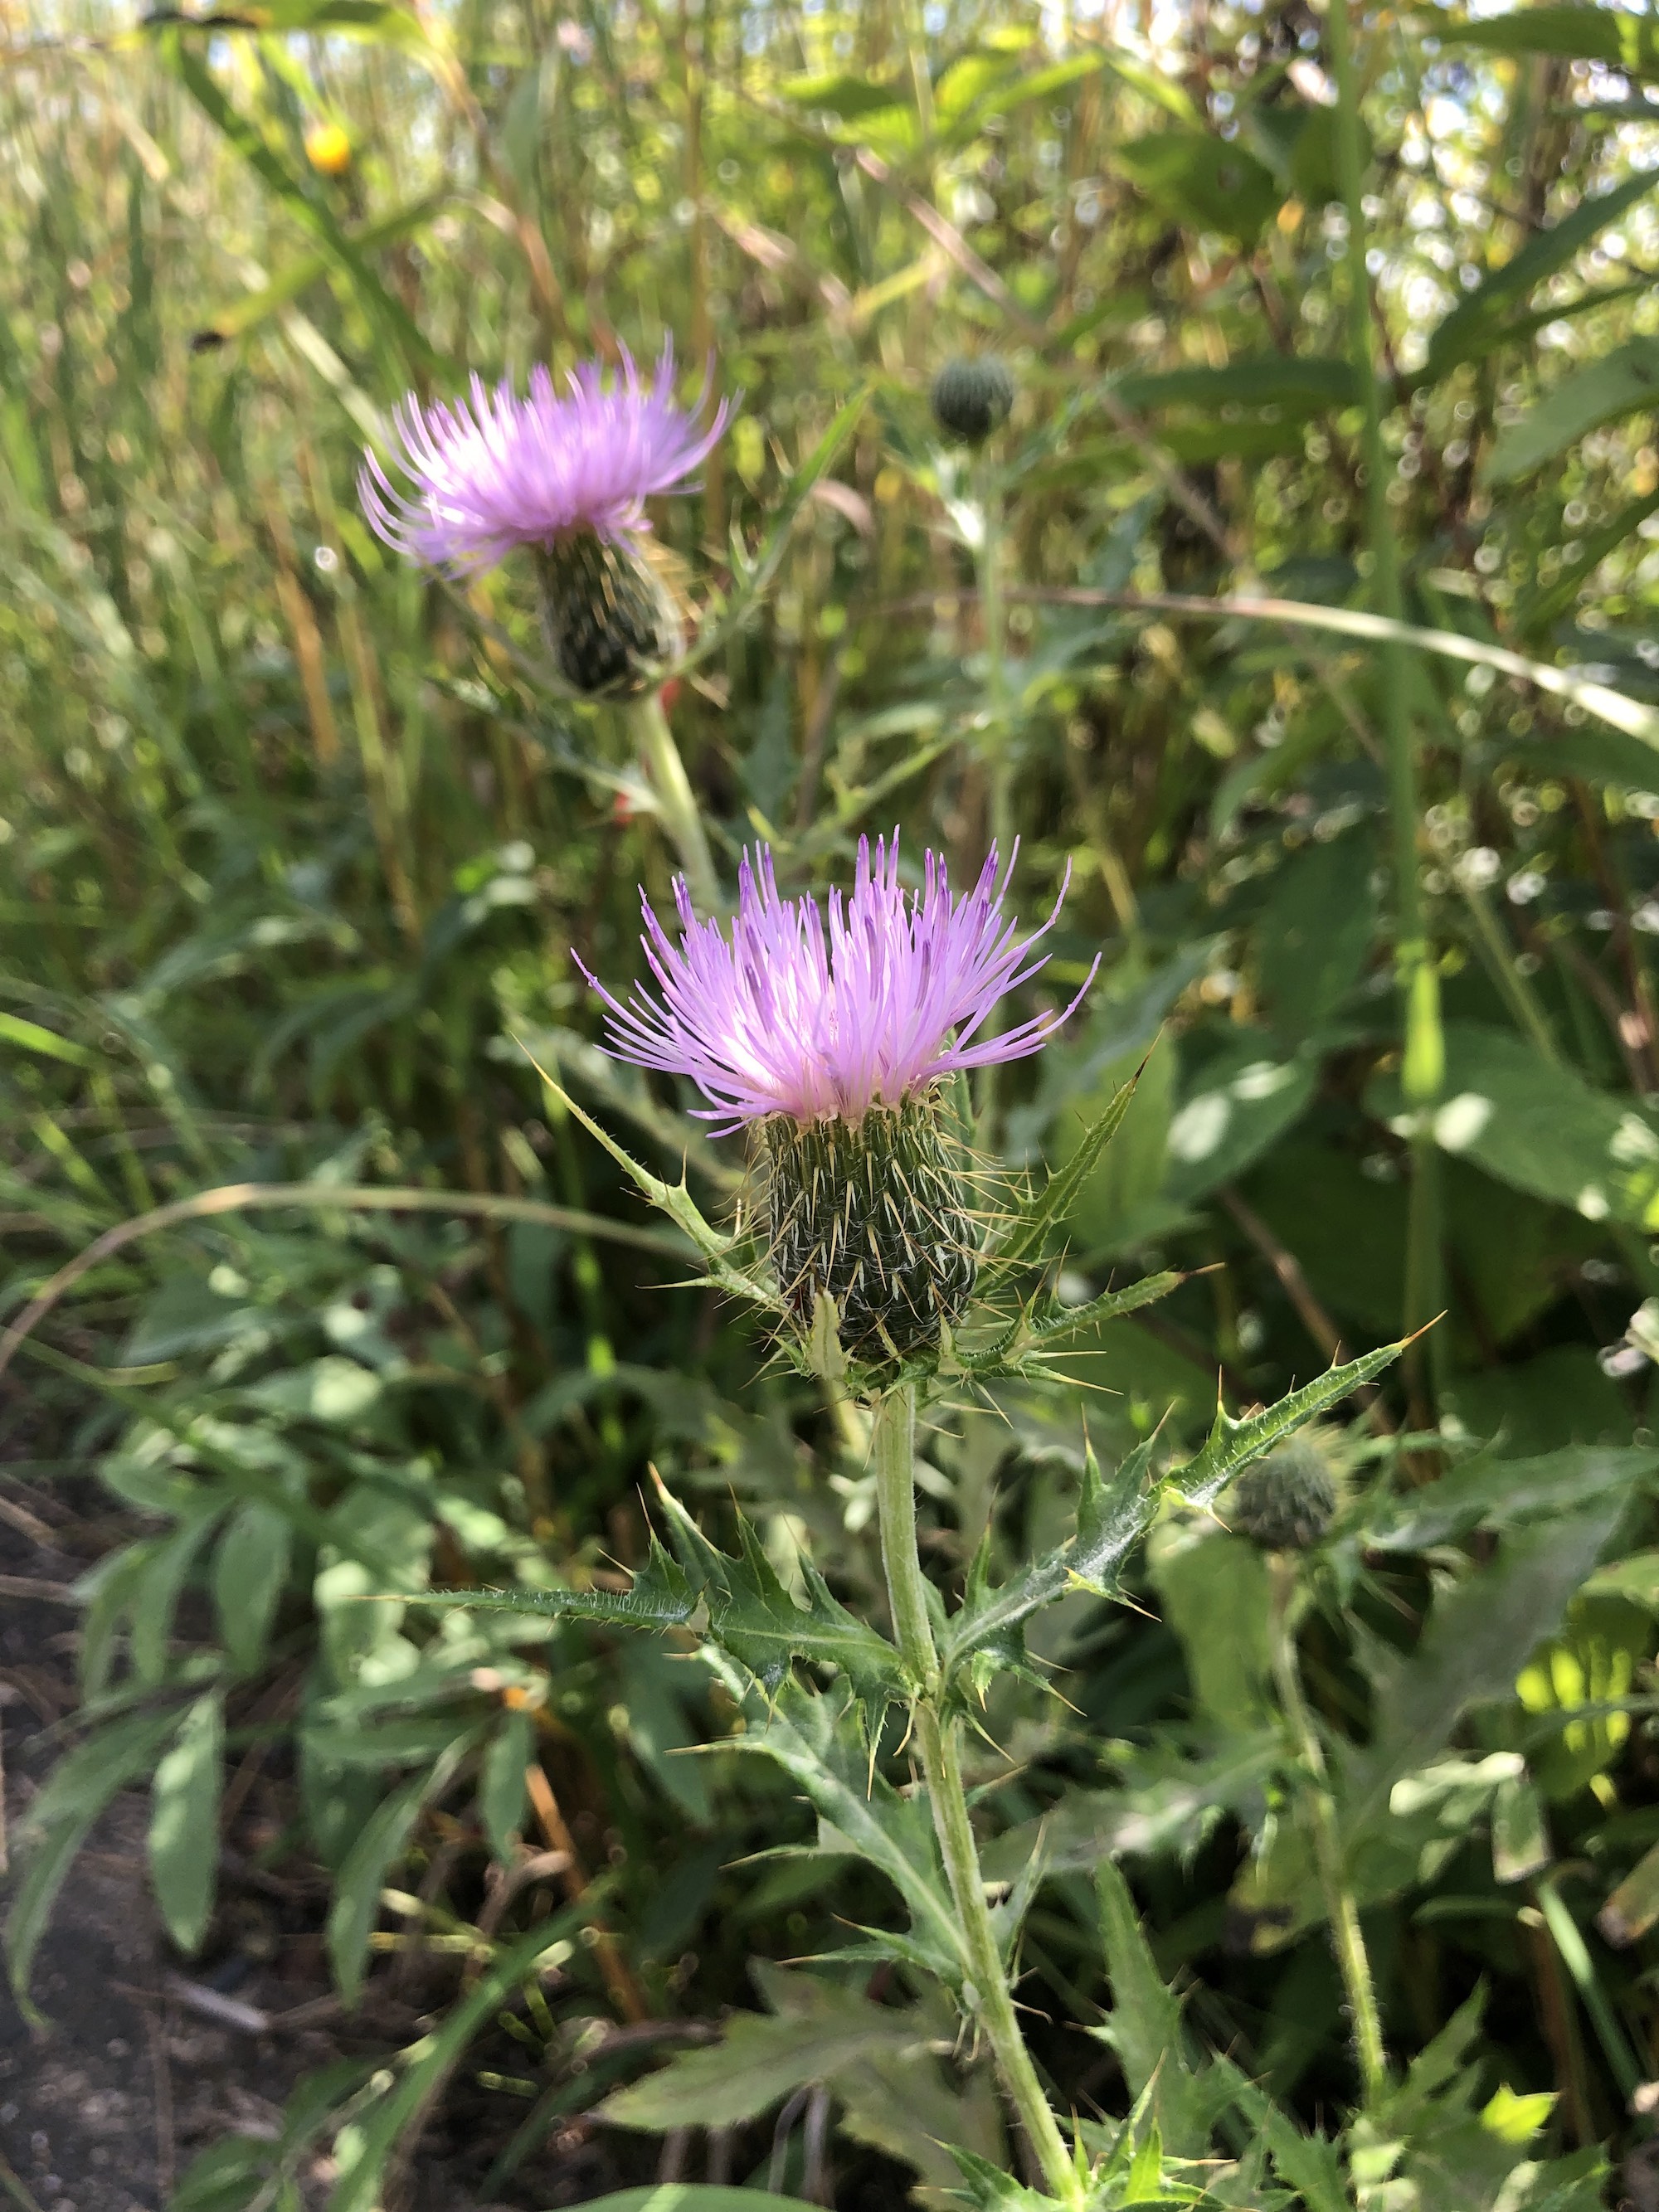 Field Thistle in UW Arborteum gardens in Madison, Wisconsin on September 7, 2022.  This is a short new growth of a taller stalk that was cut.